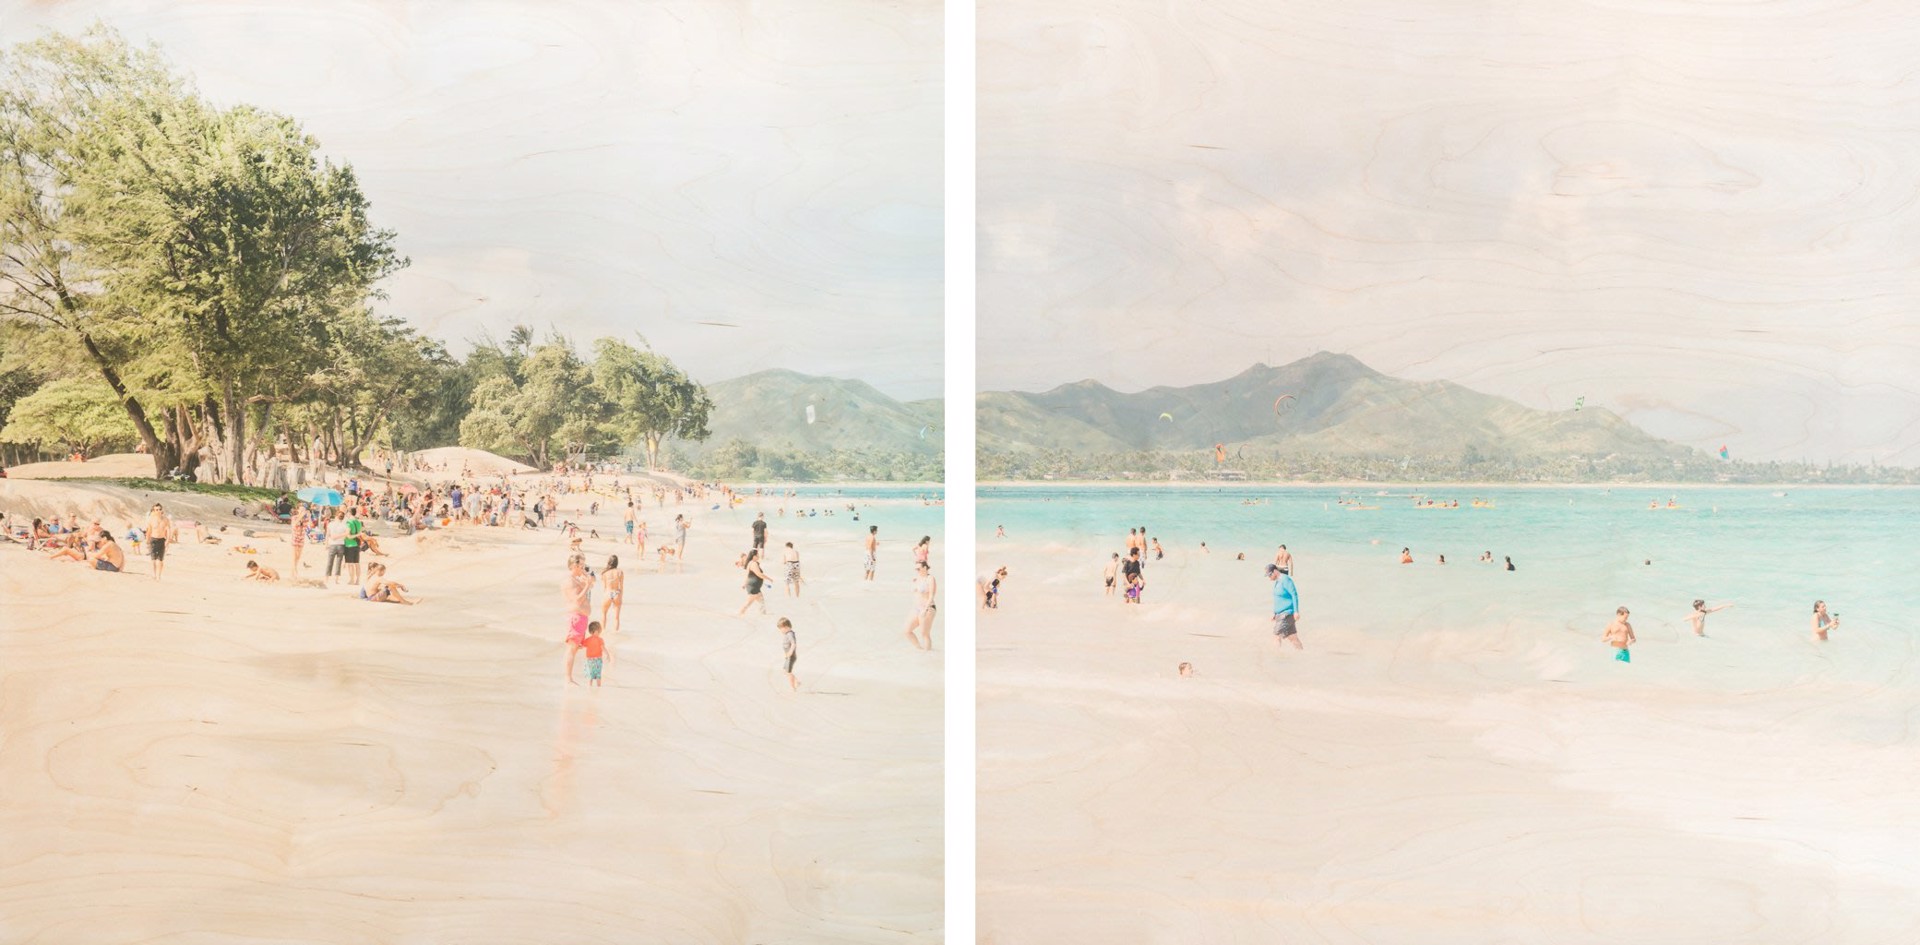 Then and There - Diptych by Patrick Lajoie